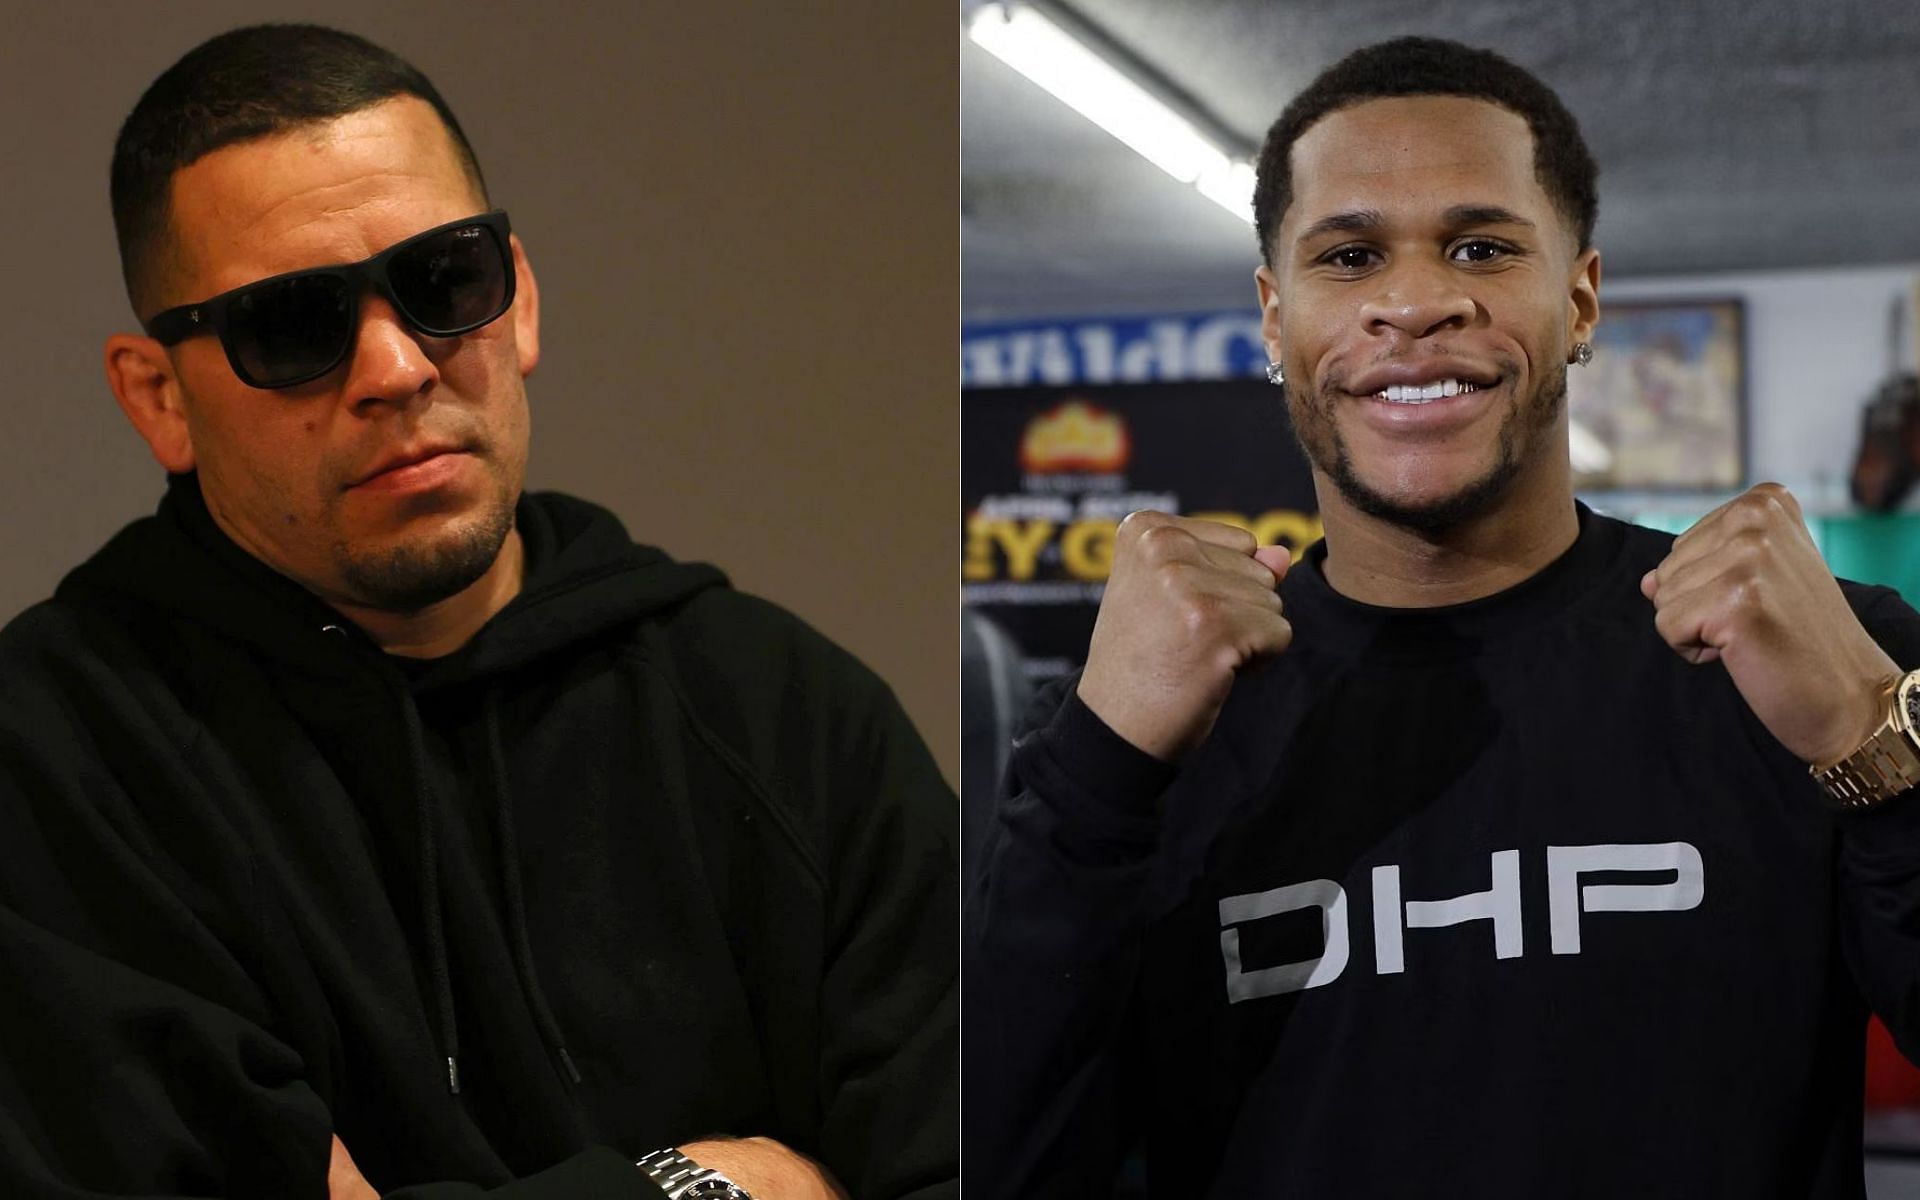 Nate Diaz (left) uploads a post mentioning Devin Haney (right) [Images via Getty]